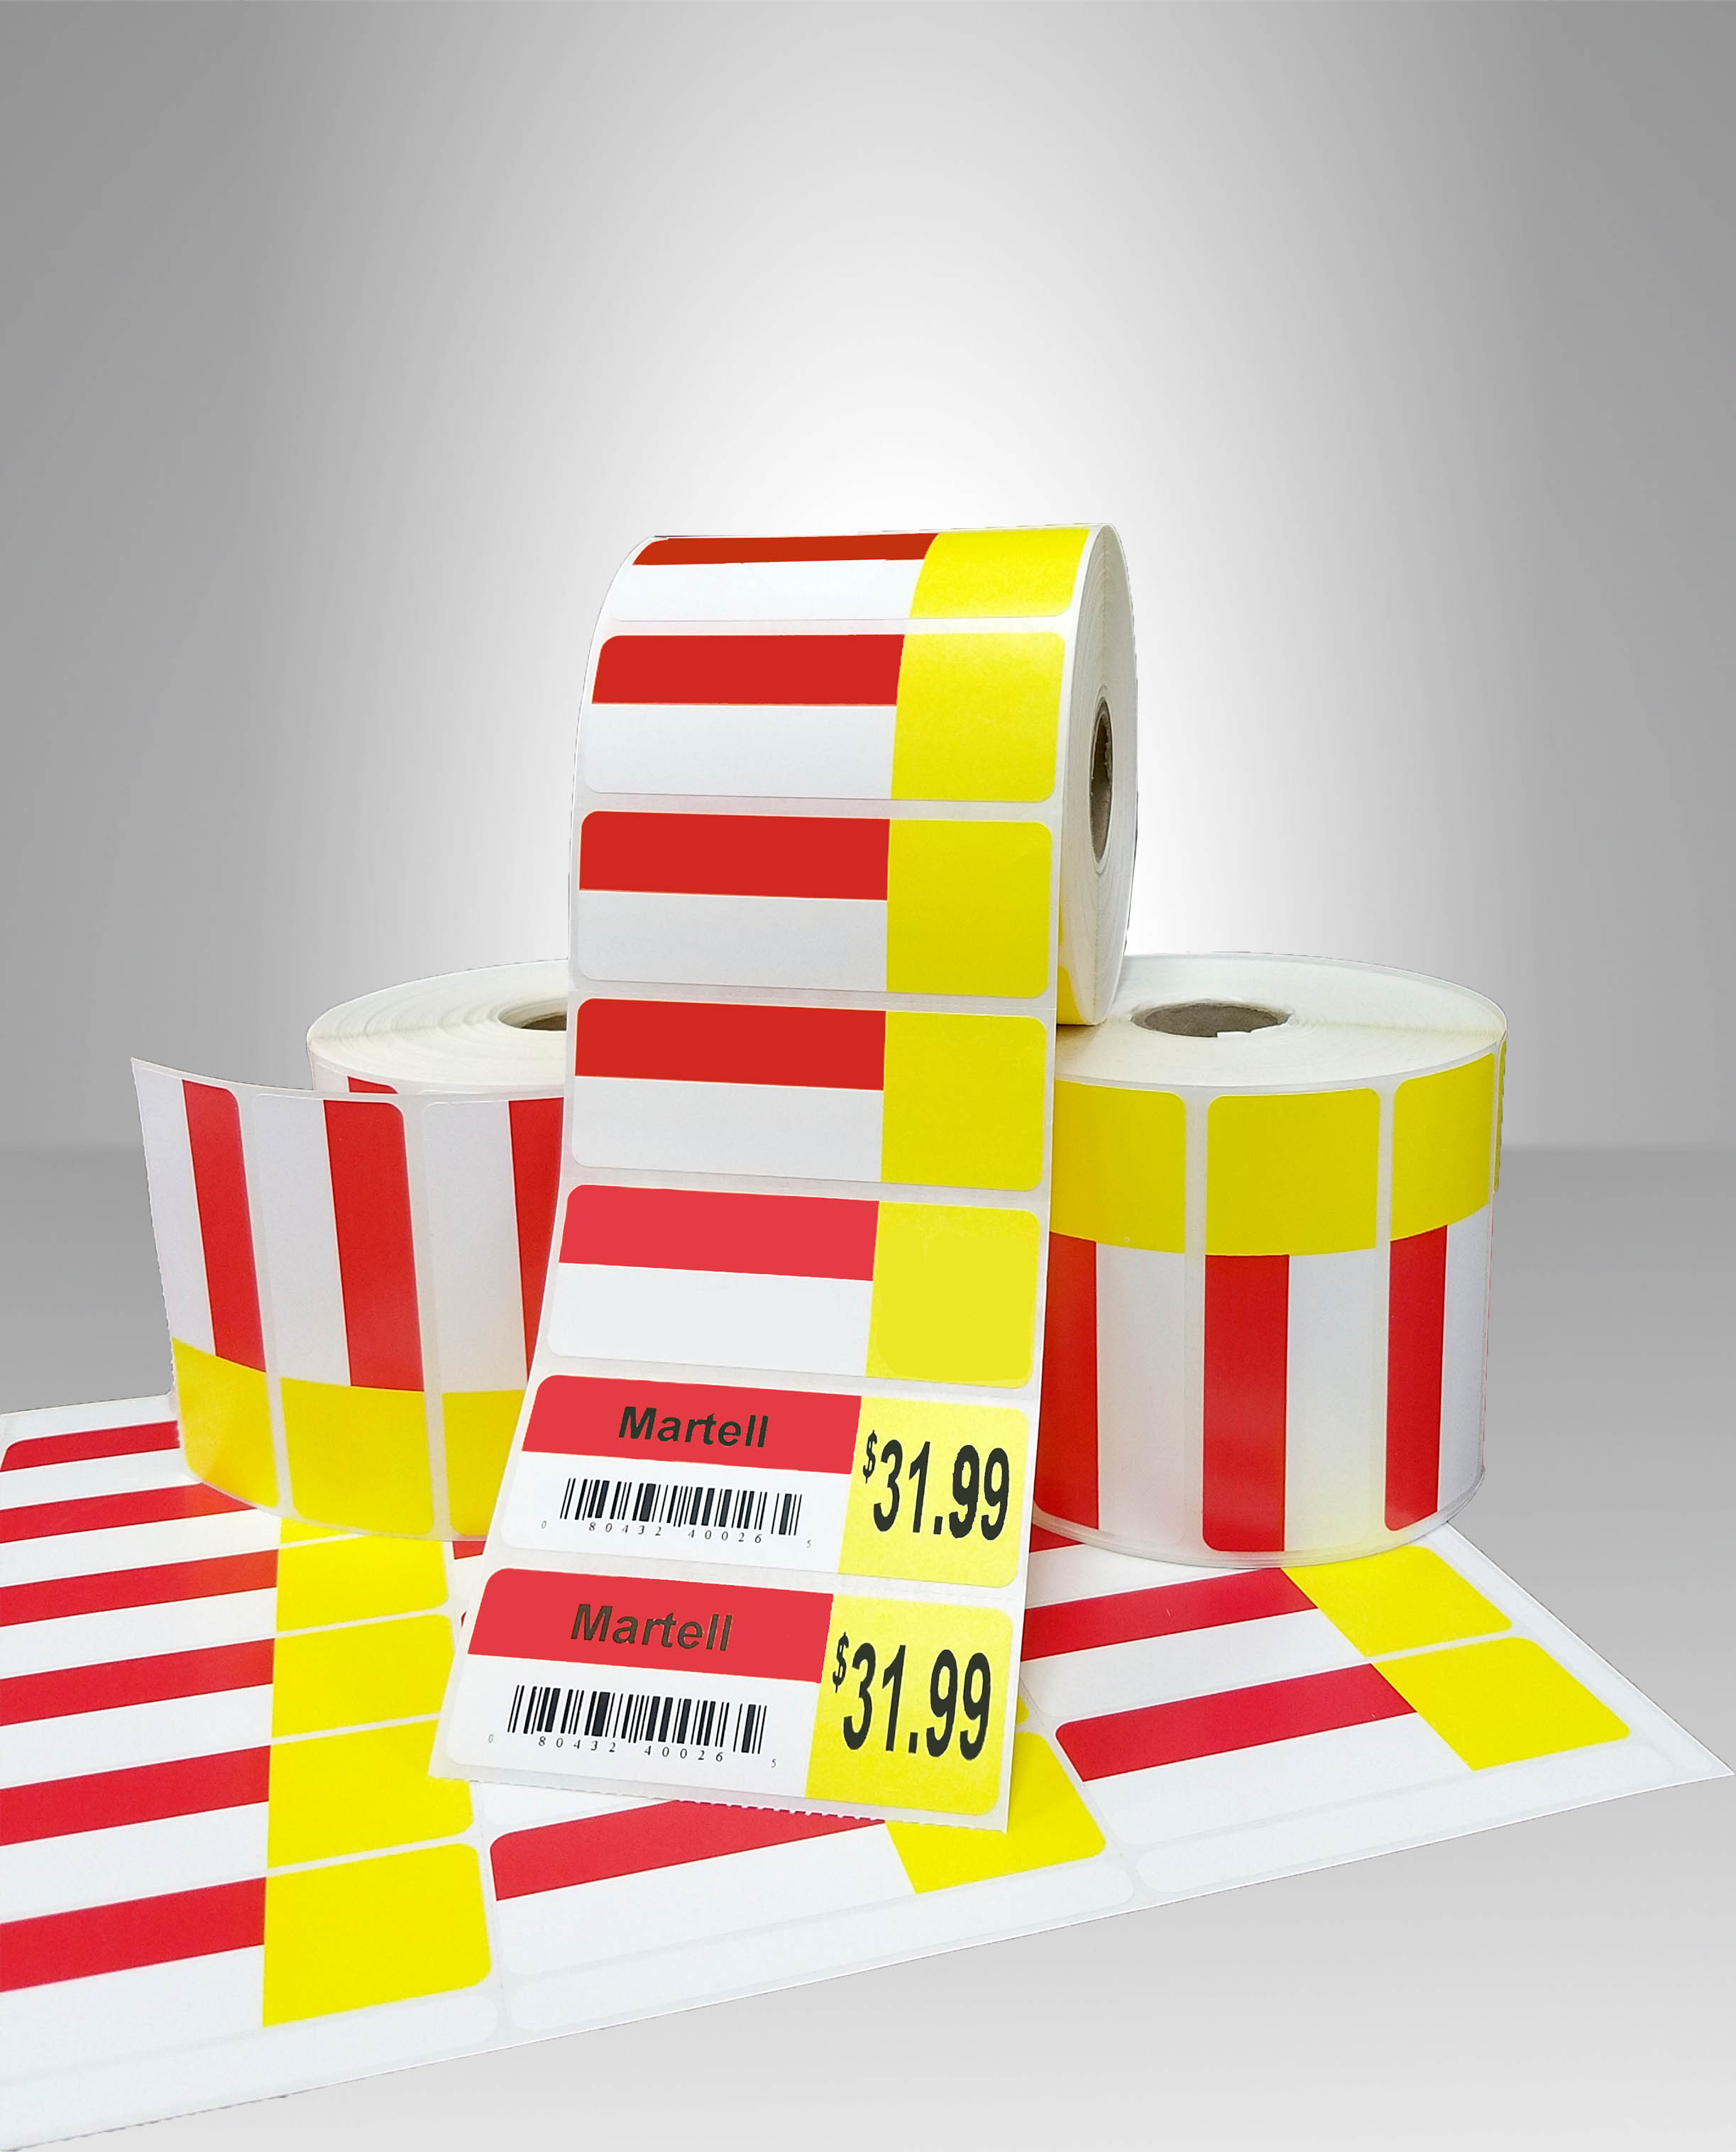 These labels were designed to duplicate item #R018000-RY 18up Red/Yellow labels with face perf. and removable adhesive, sheet labels for laser printers.